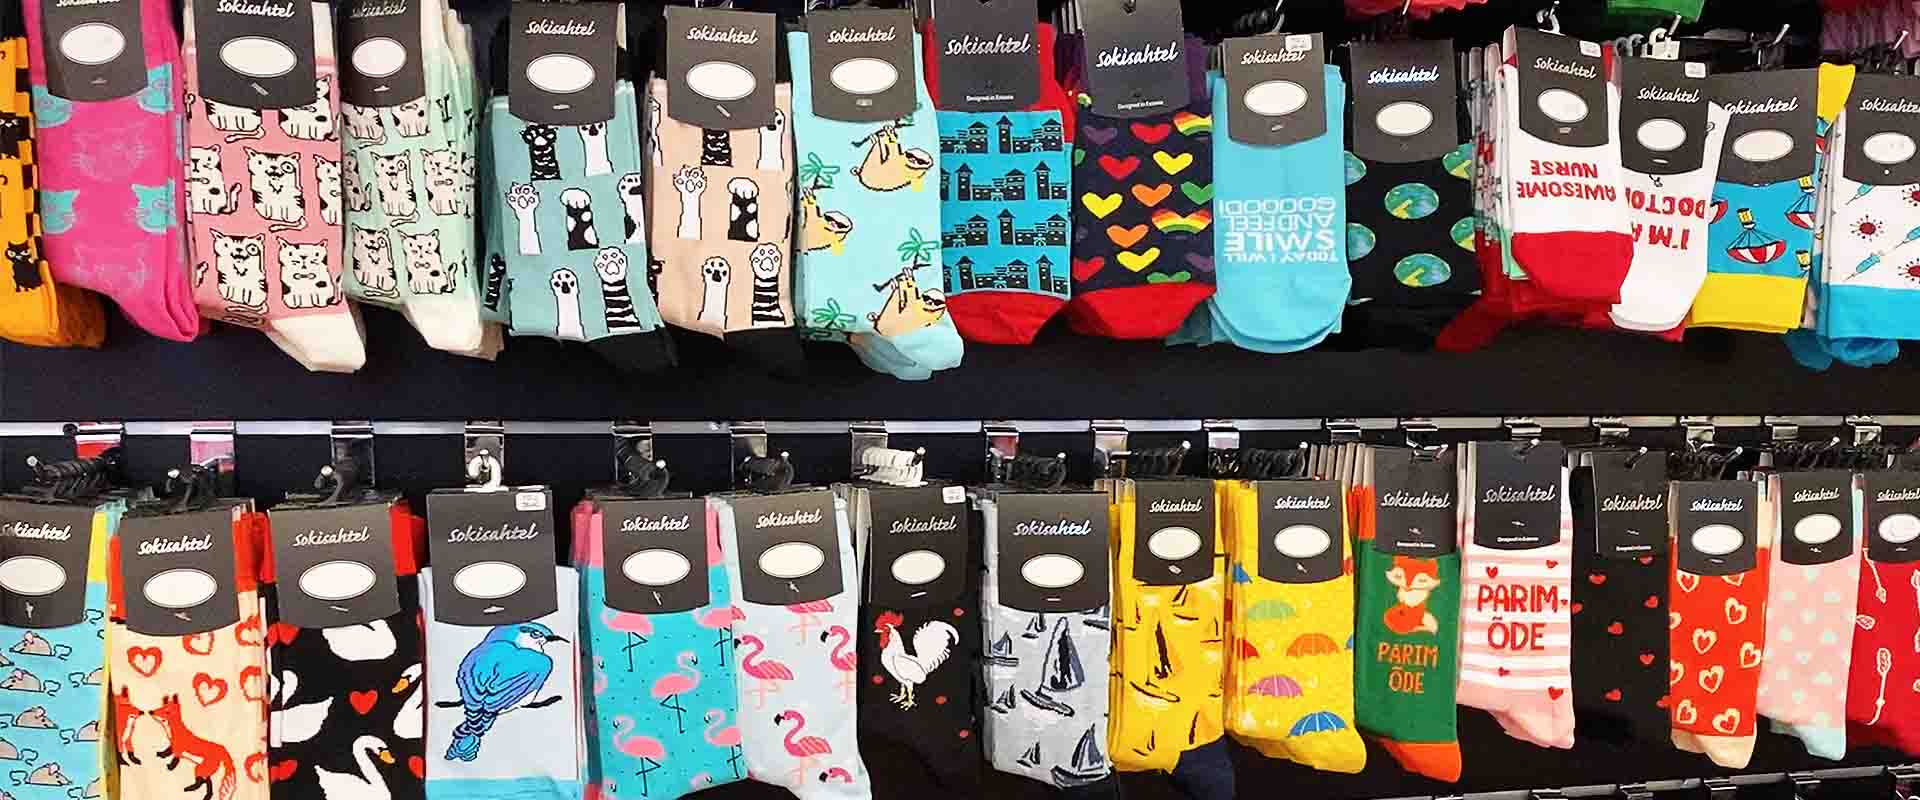 Personalized socks as a gift - we've got you covered!